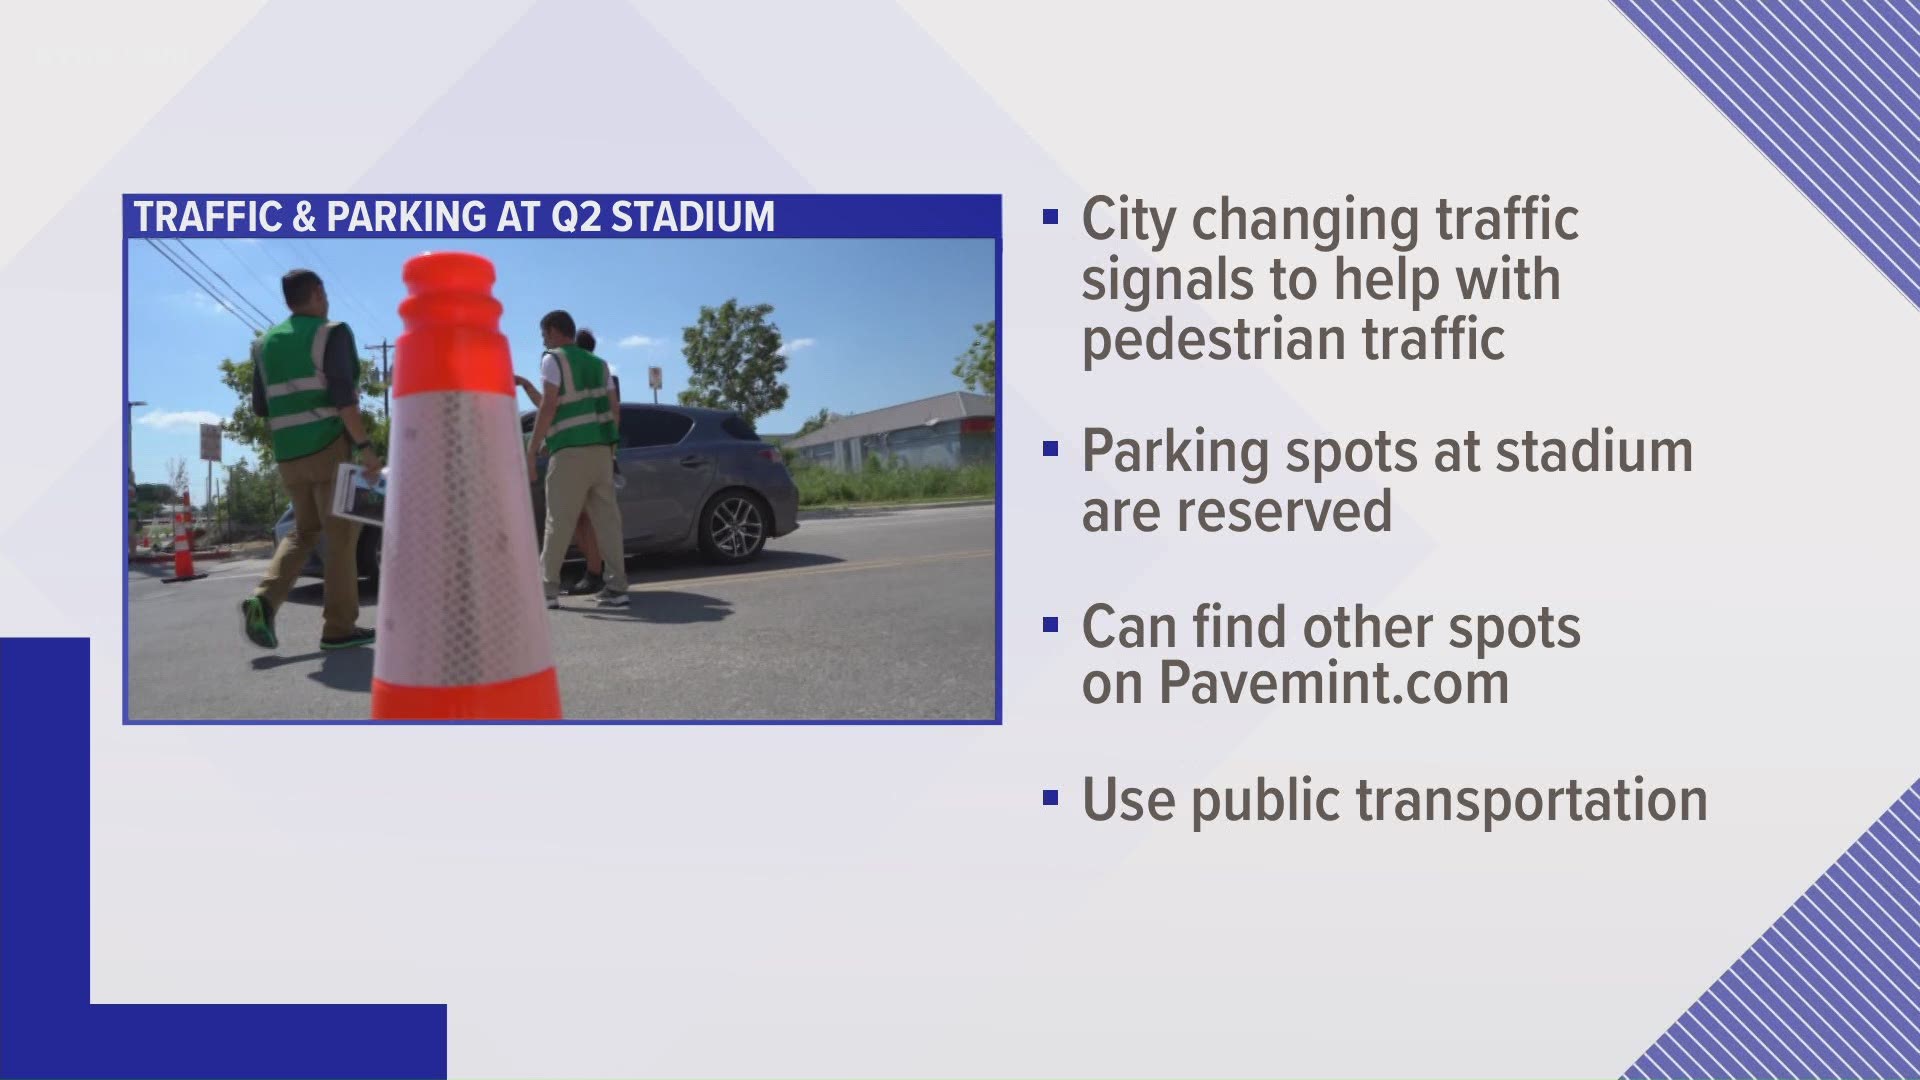 Wednesday was a dry-run for how traffic will work getting in and out of the Q2 Stadium on match days. The City could make changes every week to optimize travel.